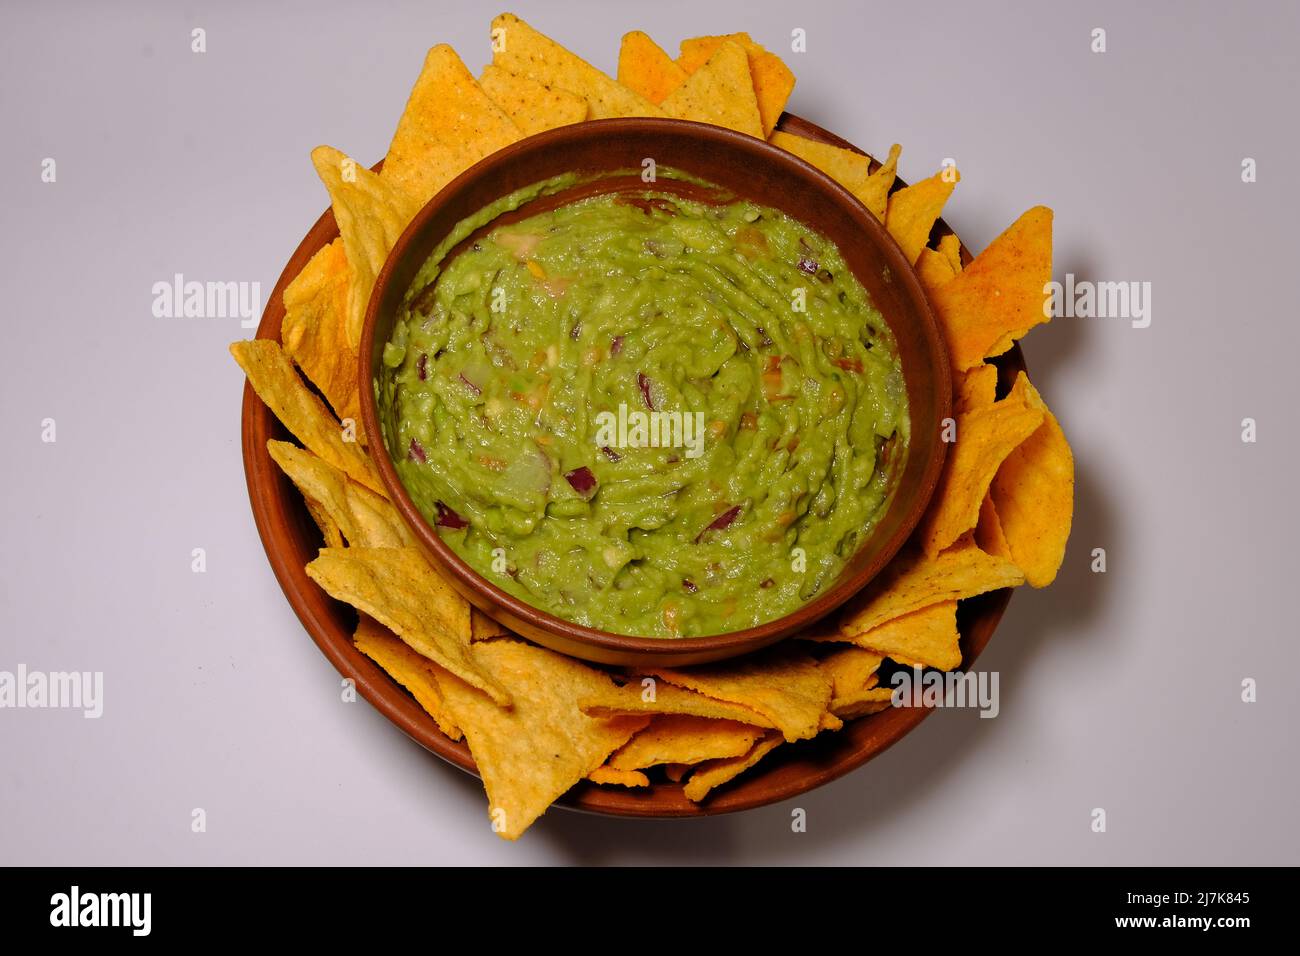 Mexican guacamole sauce and tortilla chips on a isolated white background. Guacamole bowl with nachos chips. Top view. Stock Photo